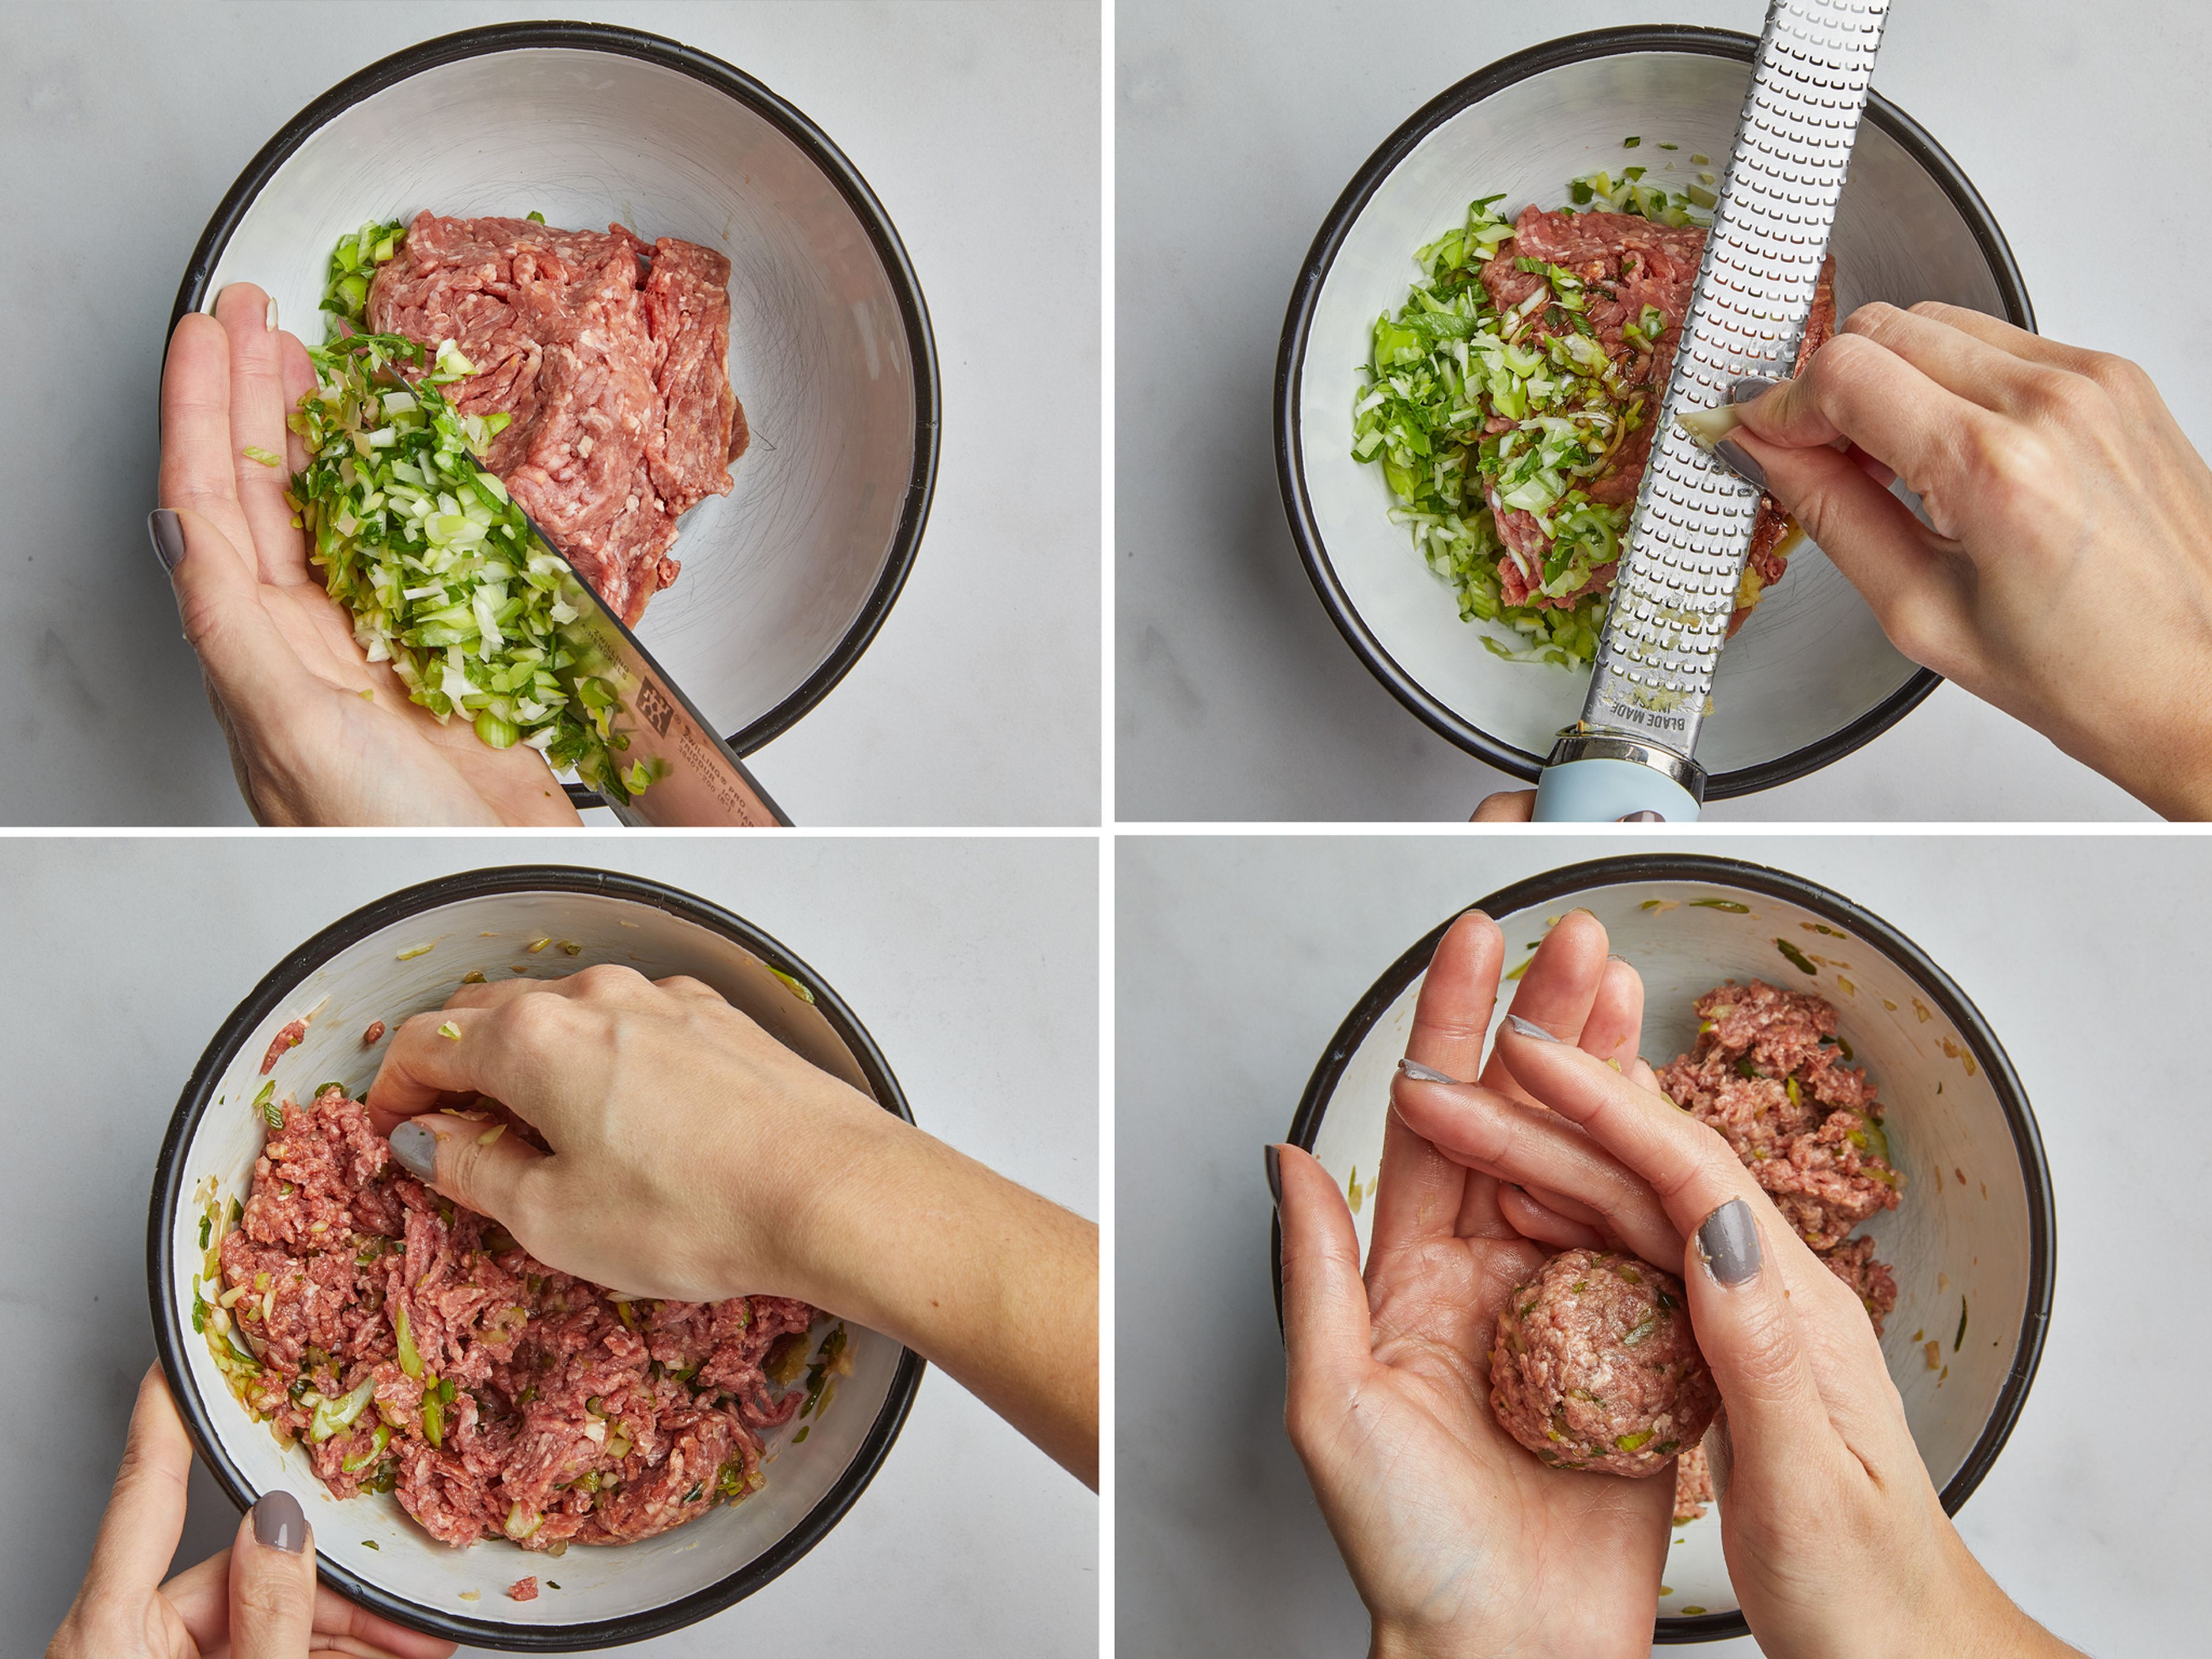 In the meantime, add ground meat to a large bowl along with scallions, toasted sesame oil, and remaining soy sauce. Use a fine grater to grate remaining ginger and garlic into the bowl. Mix gently until well combined. Then use your hands to roll the mixture into evenly sized meatballs about the size of a whole walnut and place them onto a baking sheet.